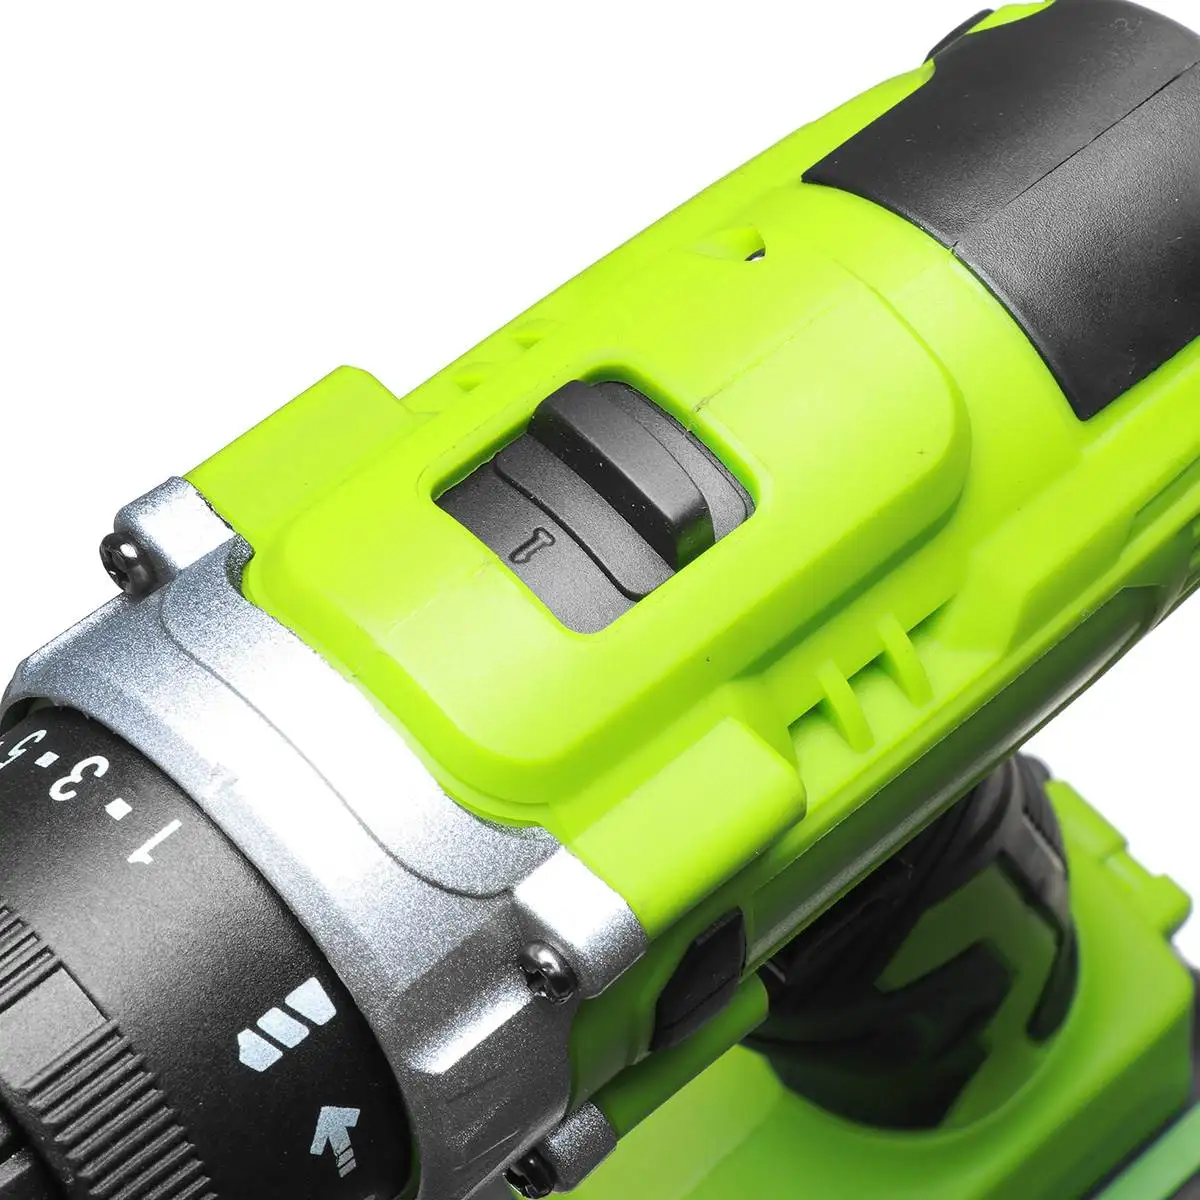 

21V Electric Drill Cordless Impact Drill Electric Screwdriver Power Tools with Lithium-Ion Battery for Drilling & Tighten Screws